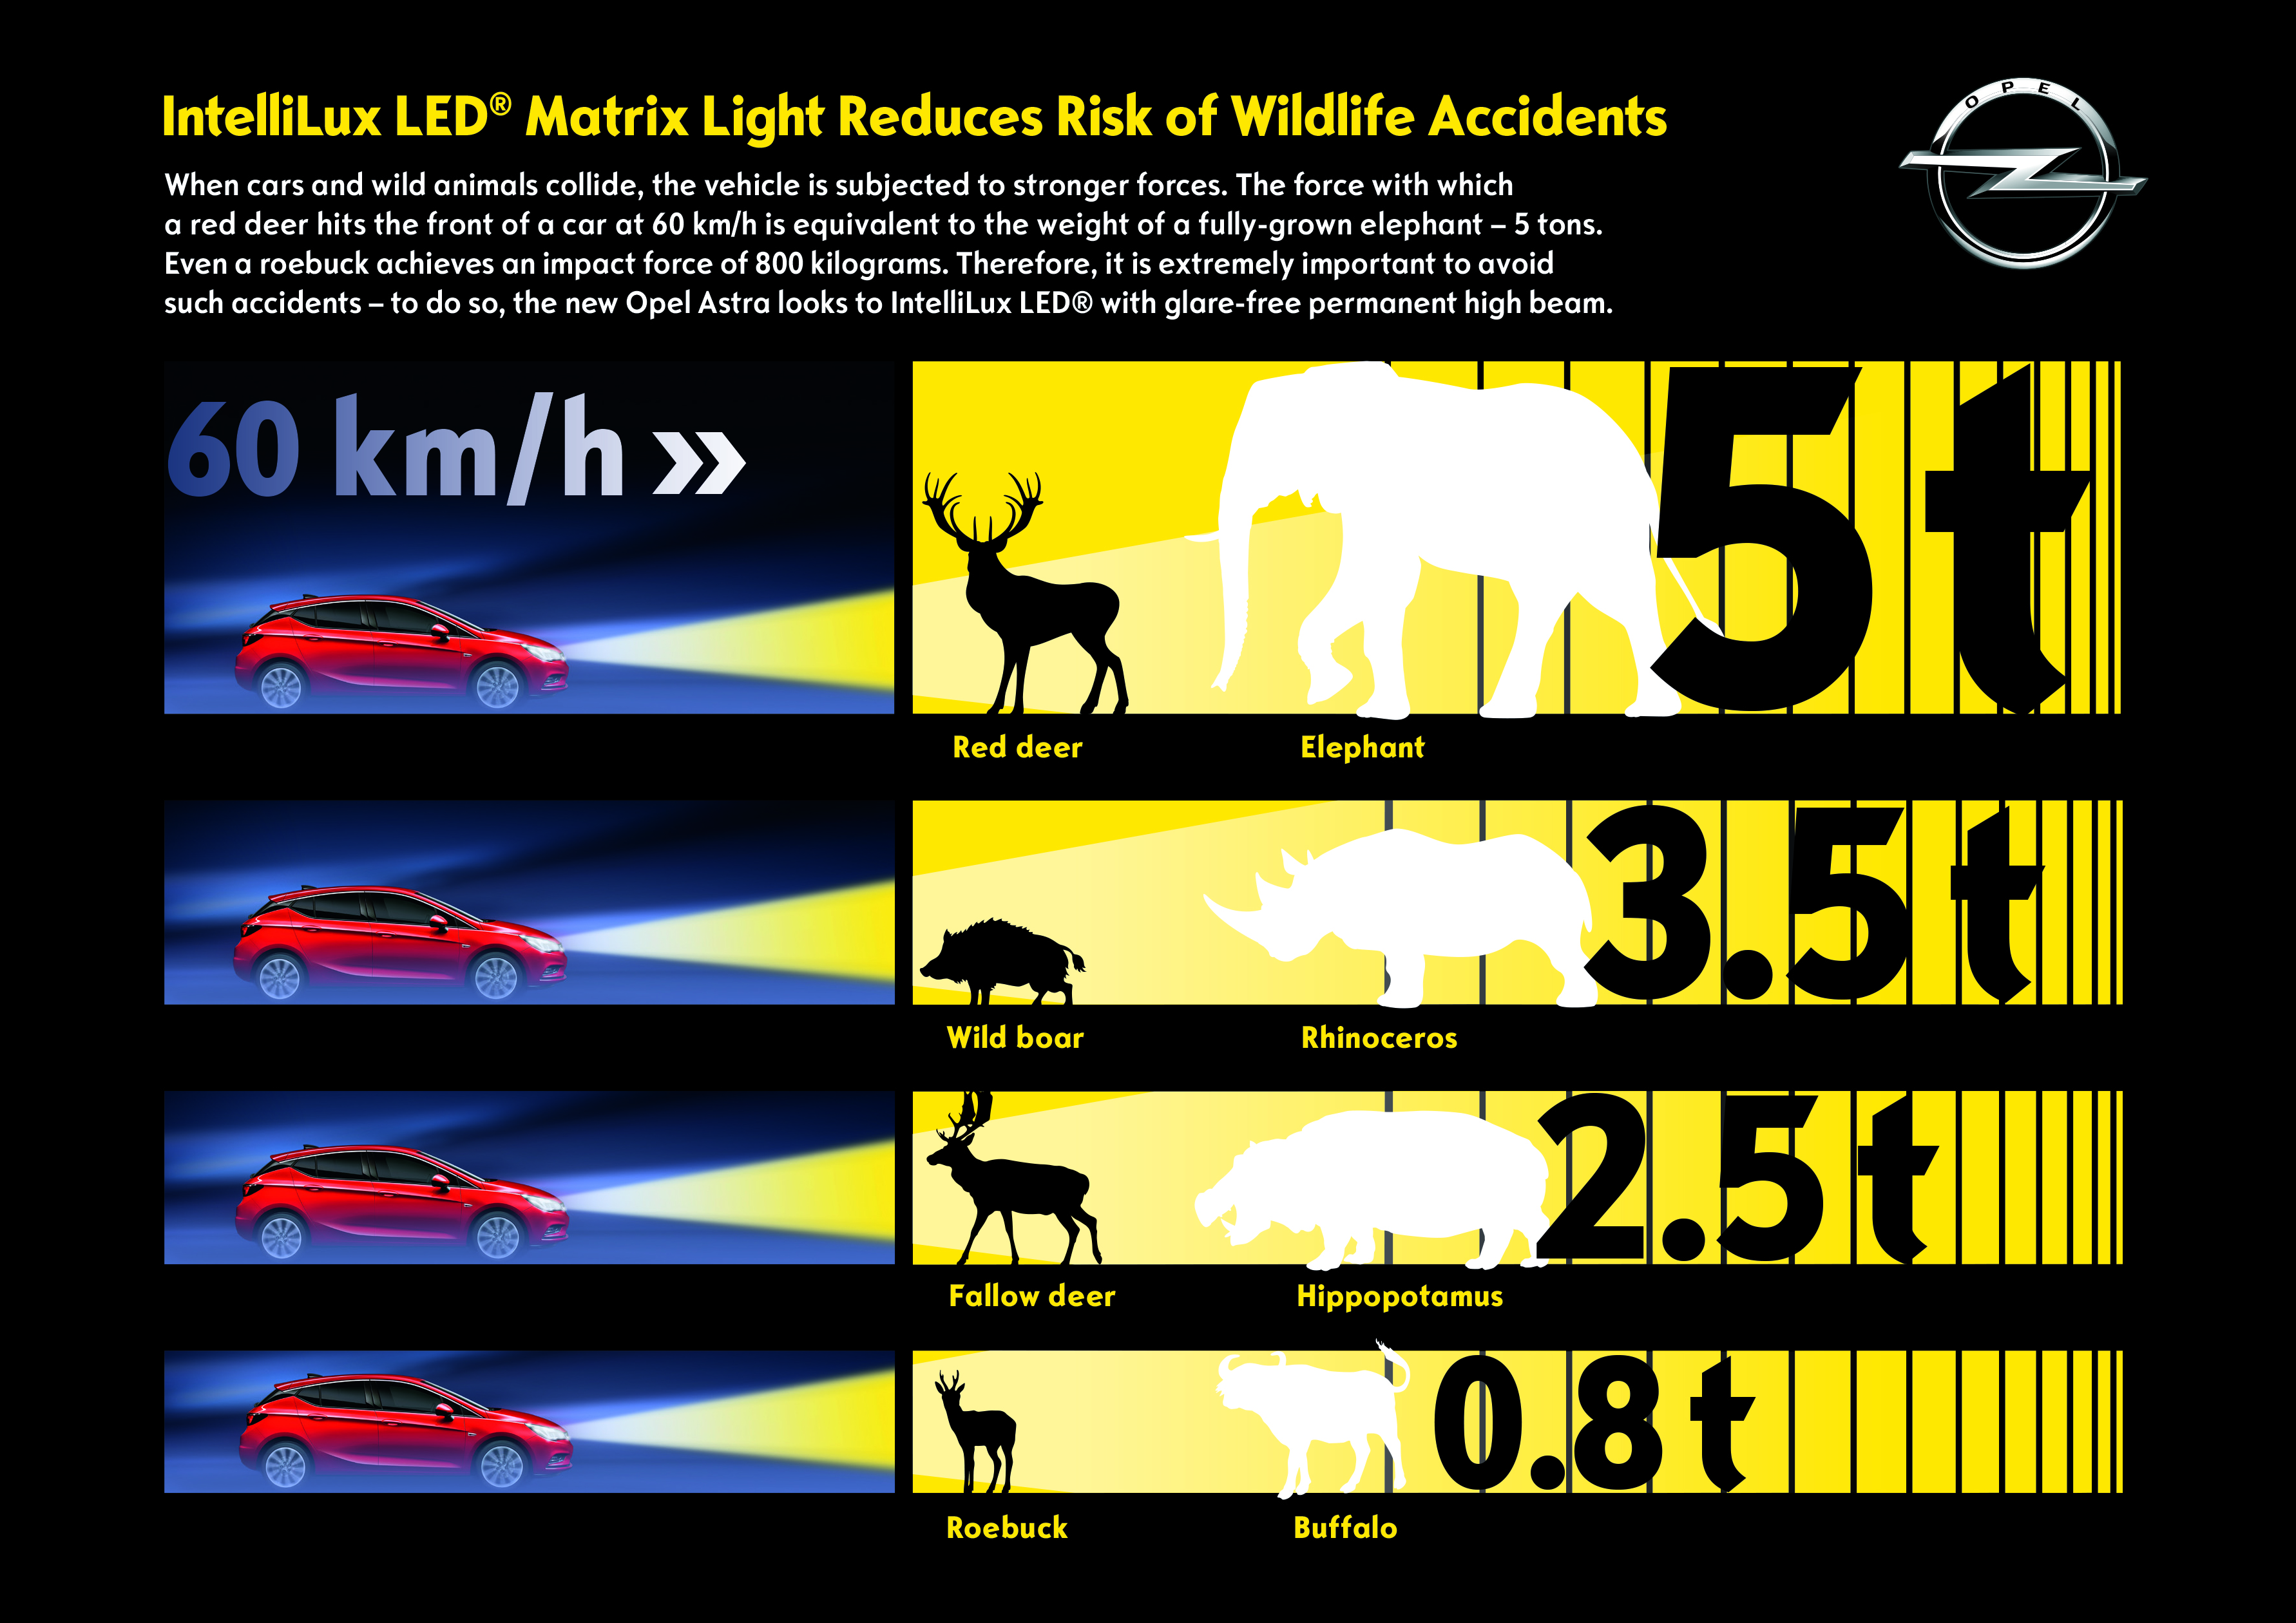 Avoiding collisions: Our native game species can reach up to 200 kilograms – when multiplied by the speed of a car the impact force can reach tons and a red deer basically becomes an elephant.